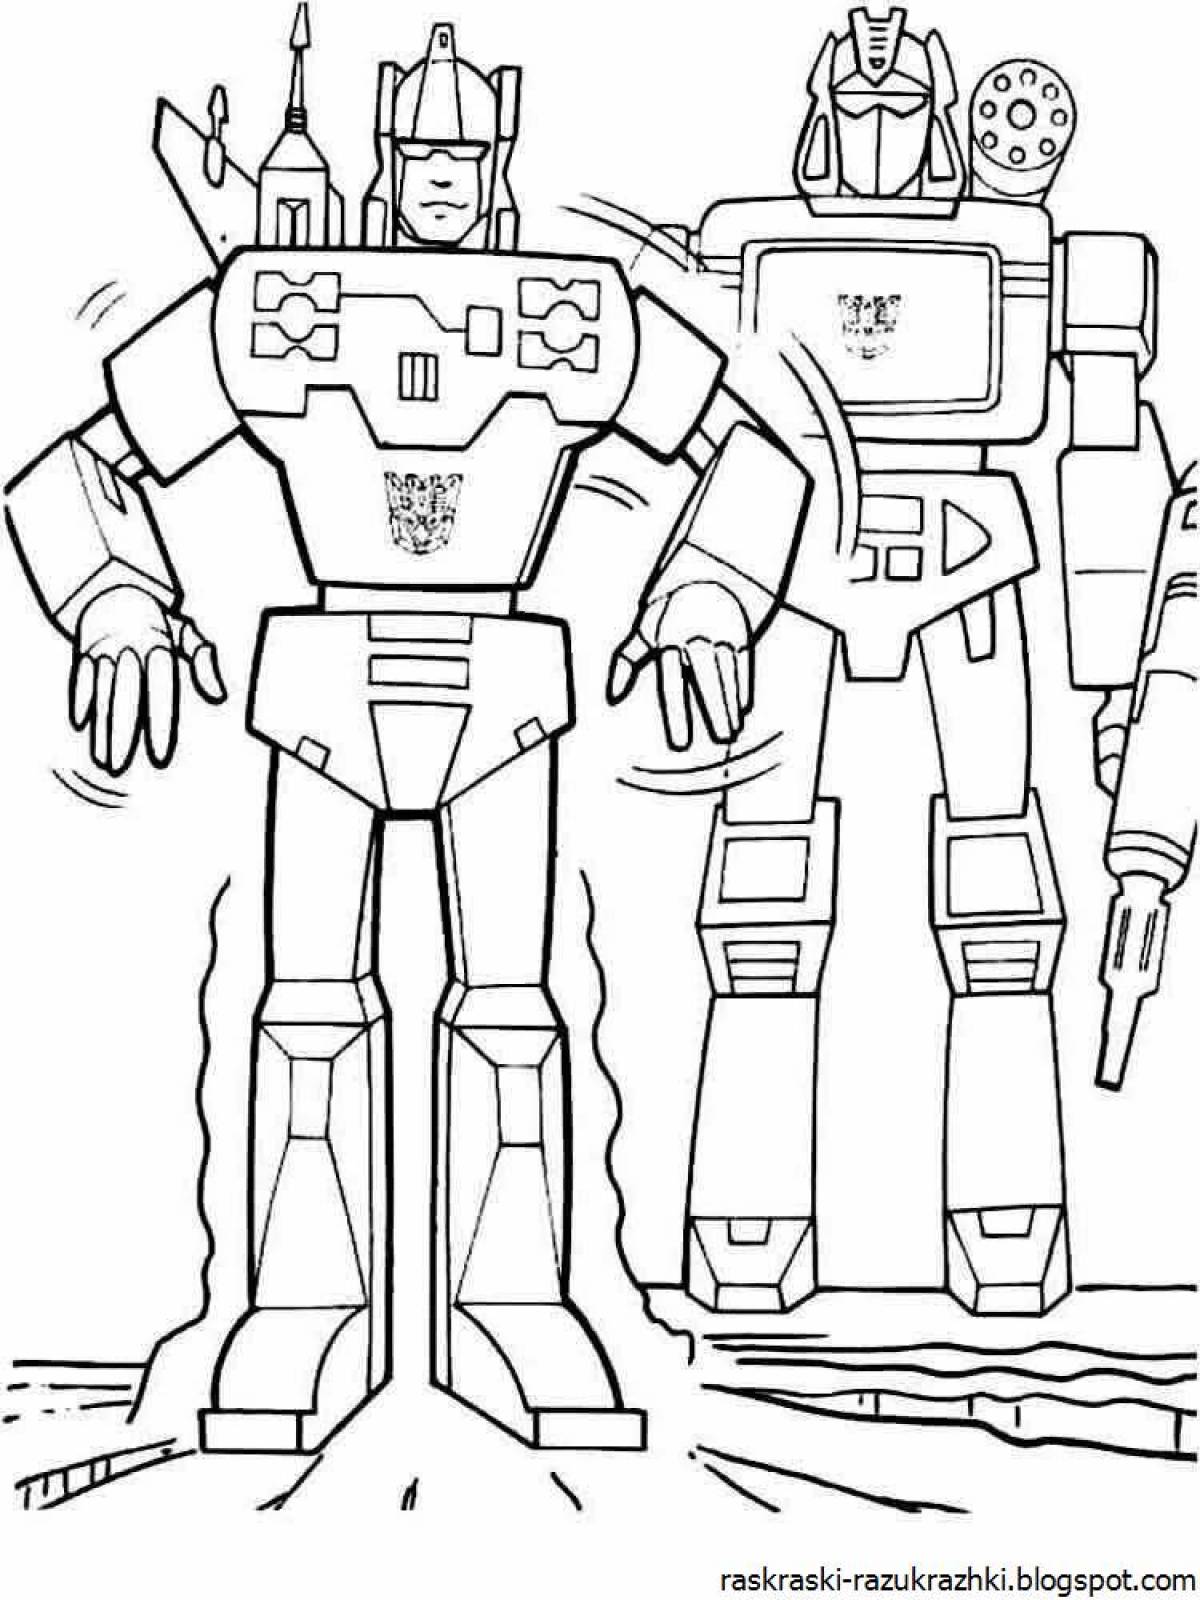 Colorful robot coloring book for 6-7 year olds